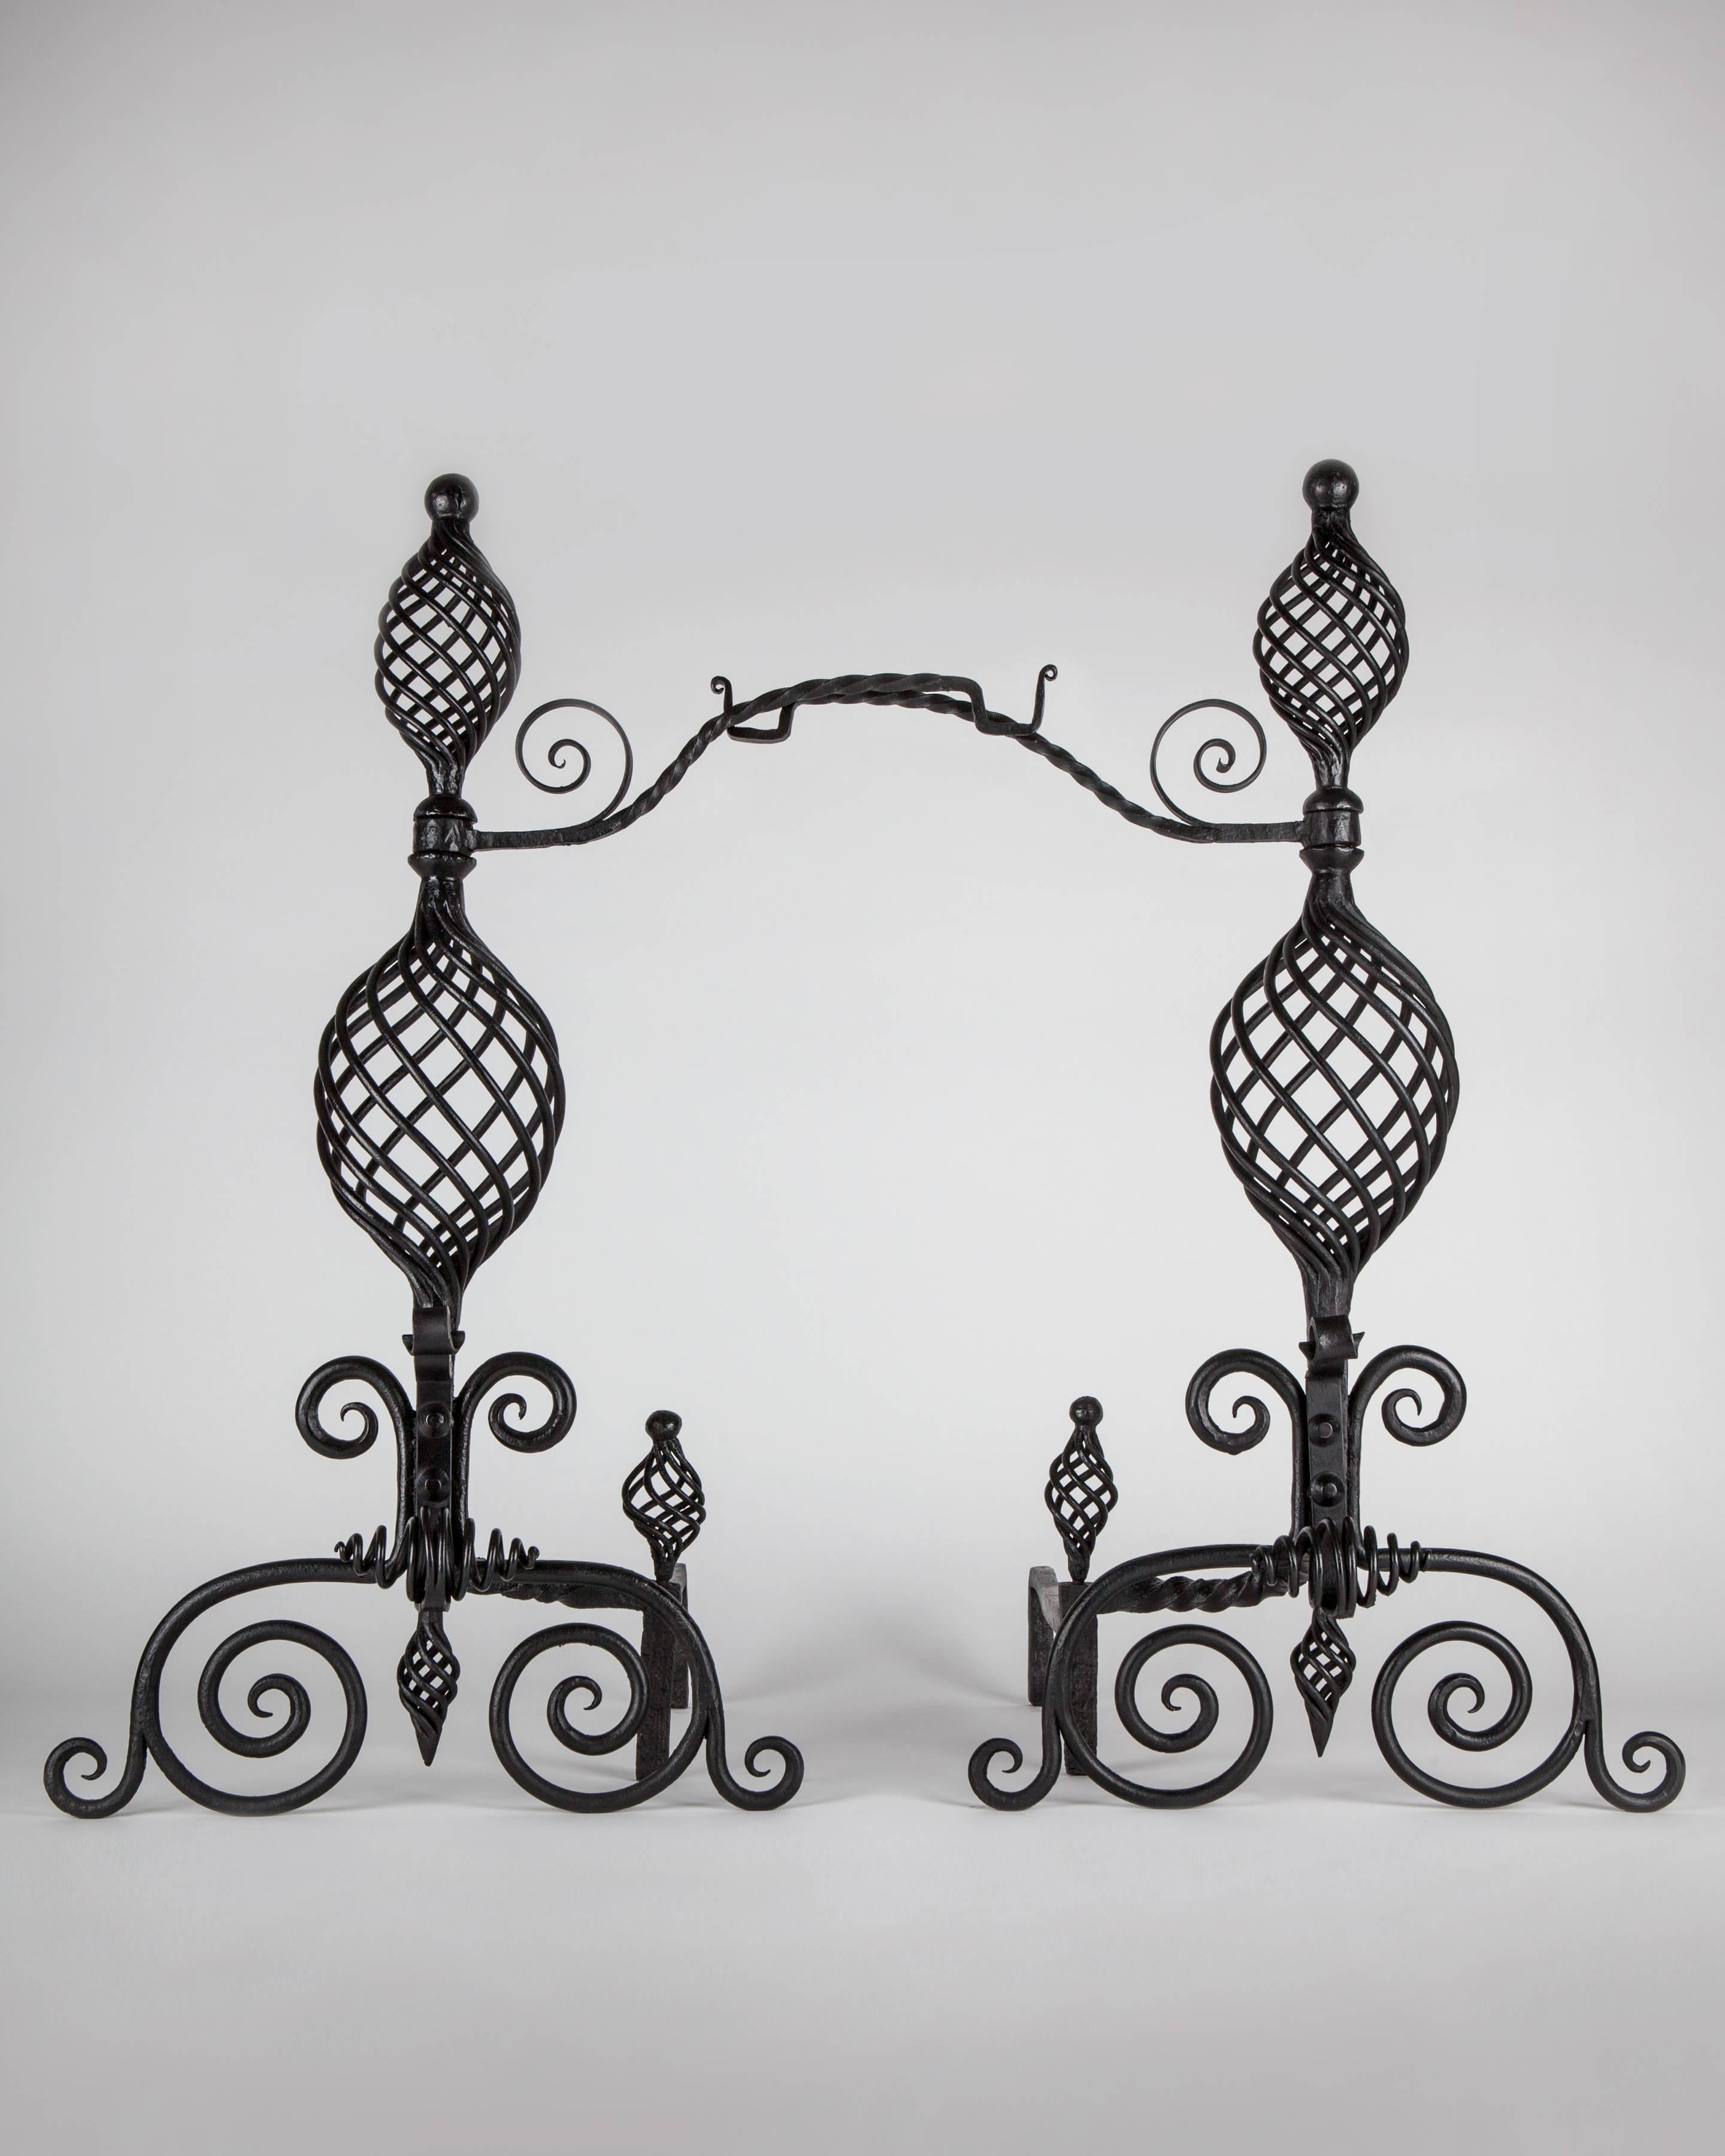 AFP0588
A pair of antique andirons in blackened wrought iron with delicate basket twist bodies and scroll feet. Retaining their original pivoting pot hooks. From a Western Connecticut estate.

Dimensions:
Overall: 29-1/2